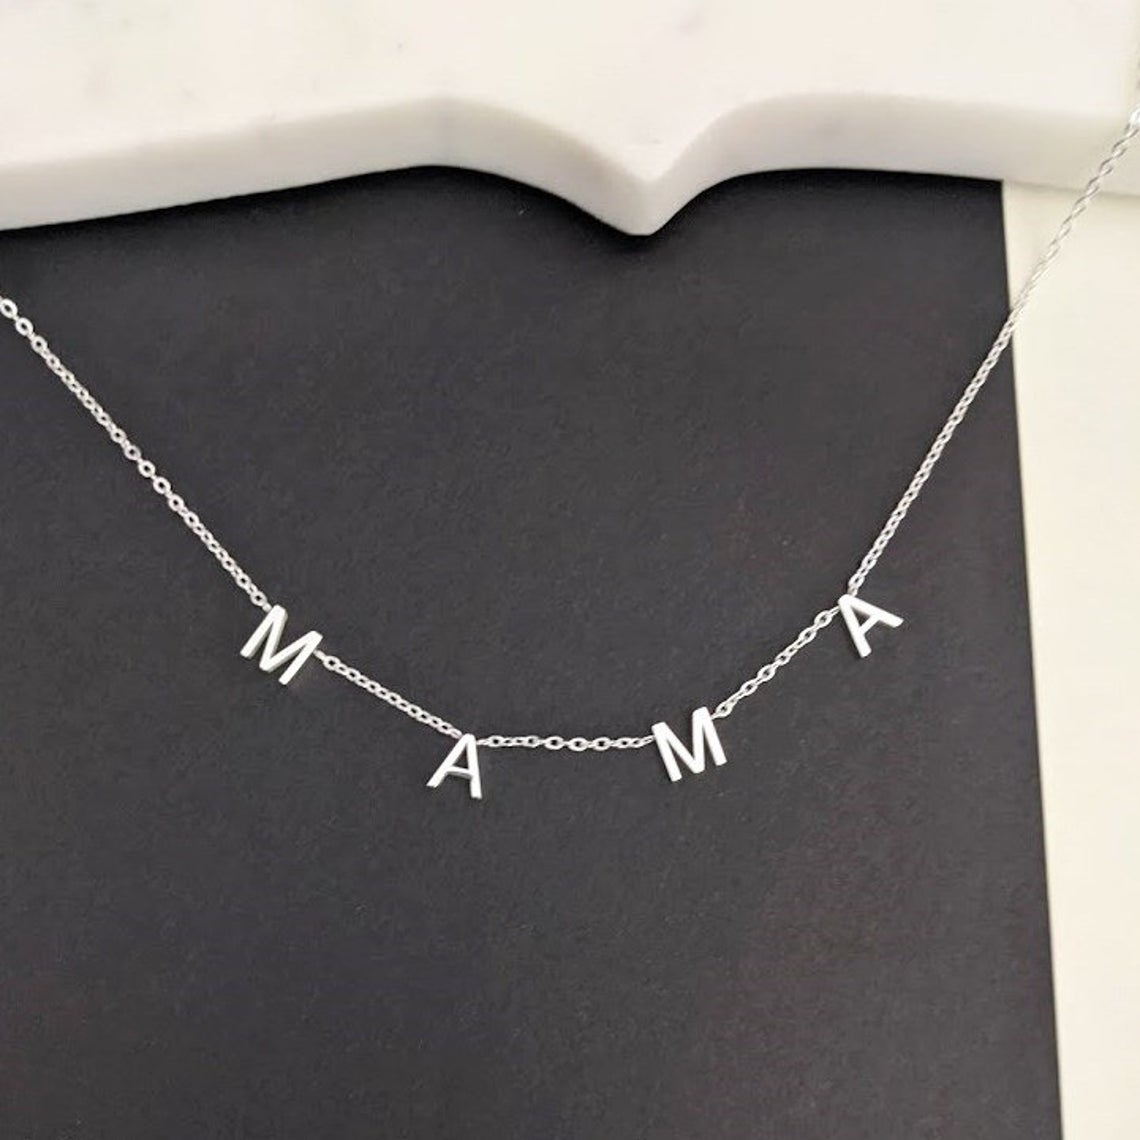 MAMA Necklace - Mother's Day Gift Valentine's for Moms